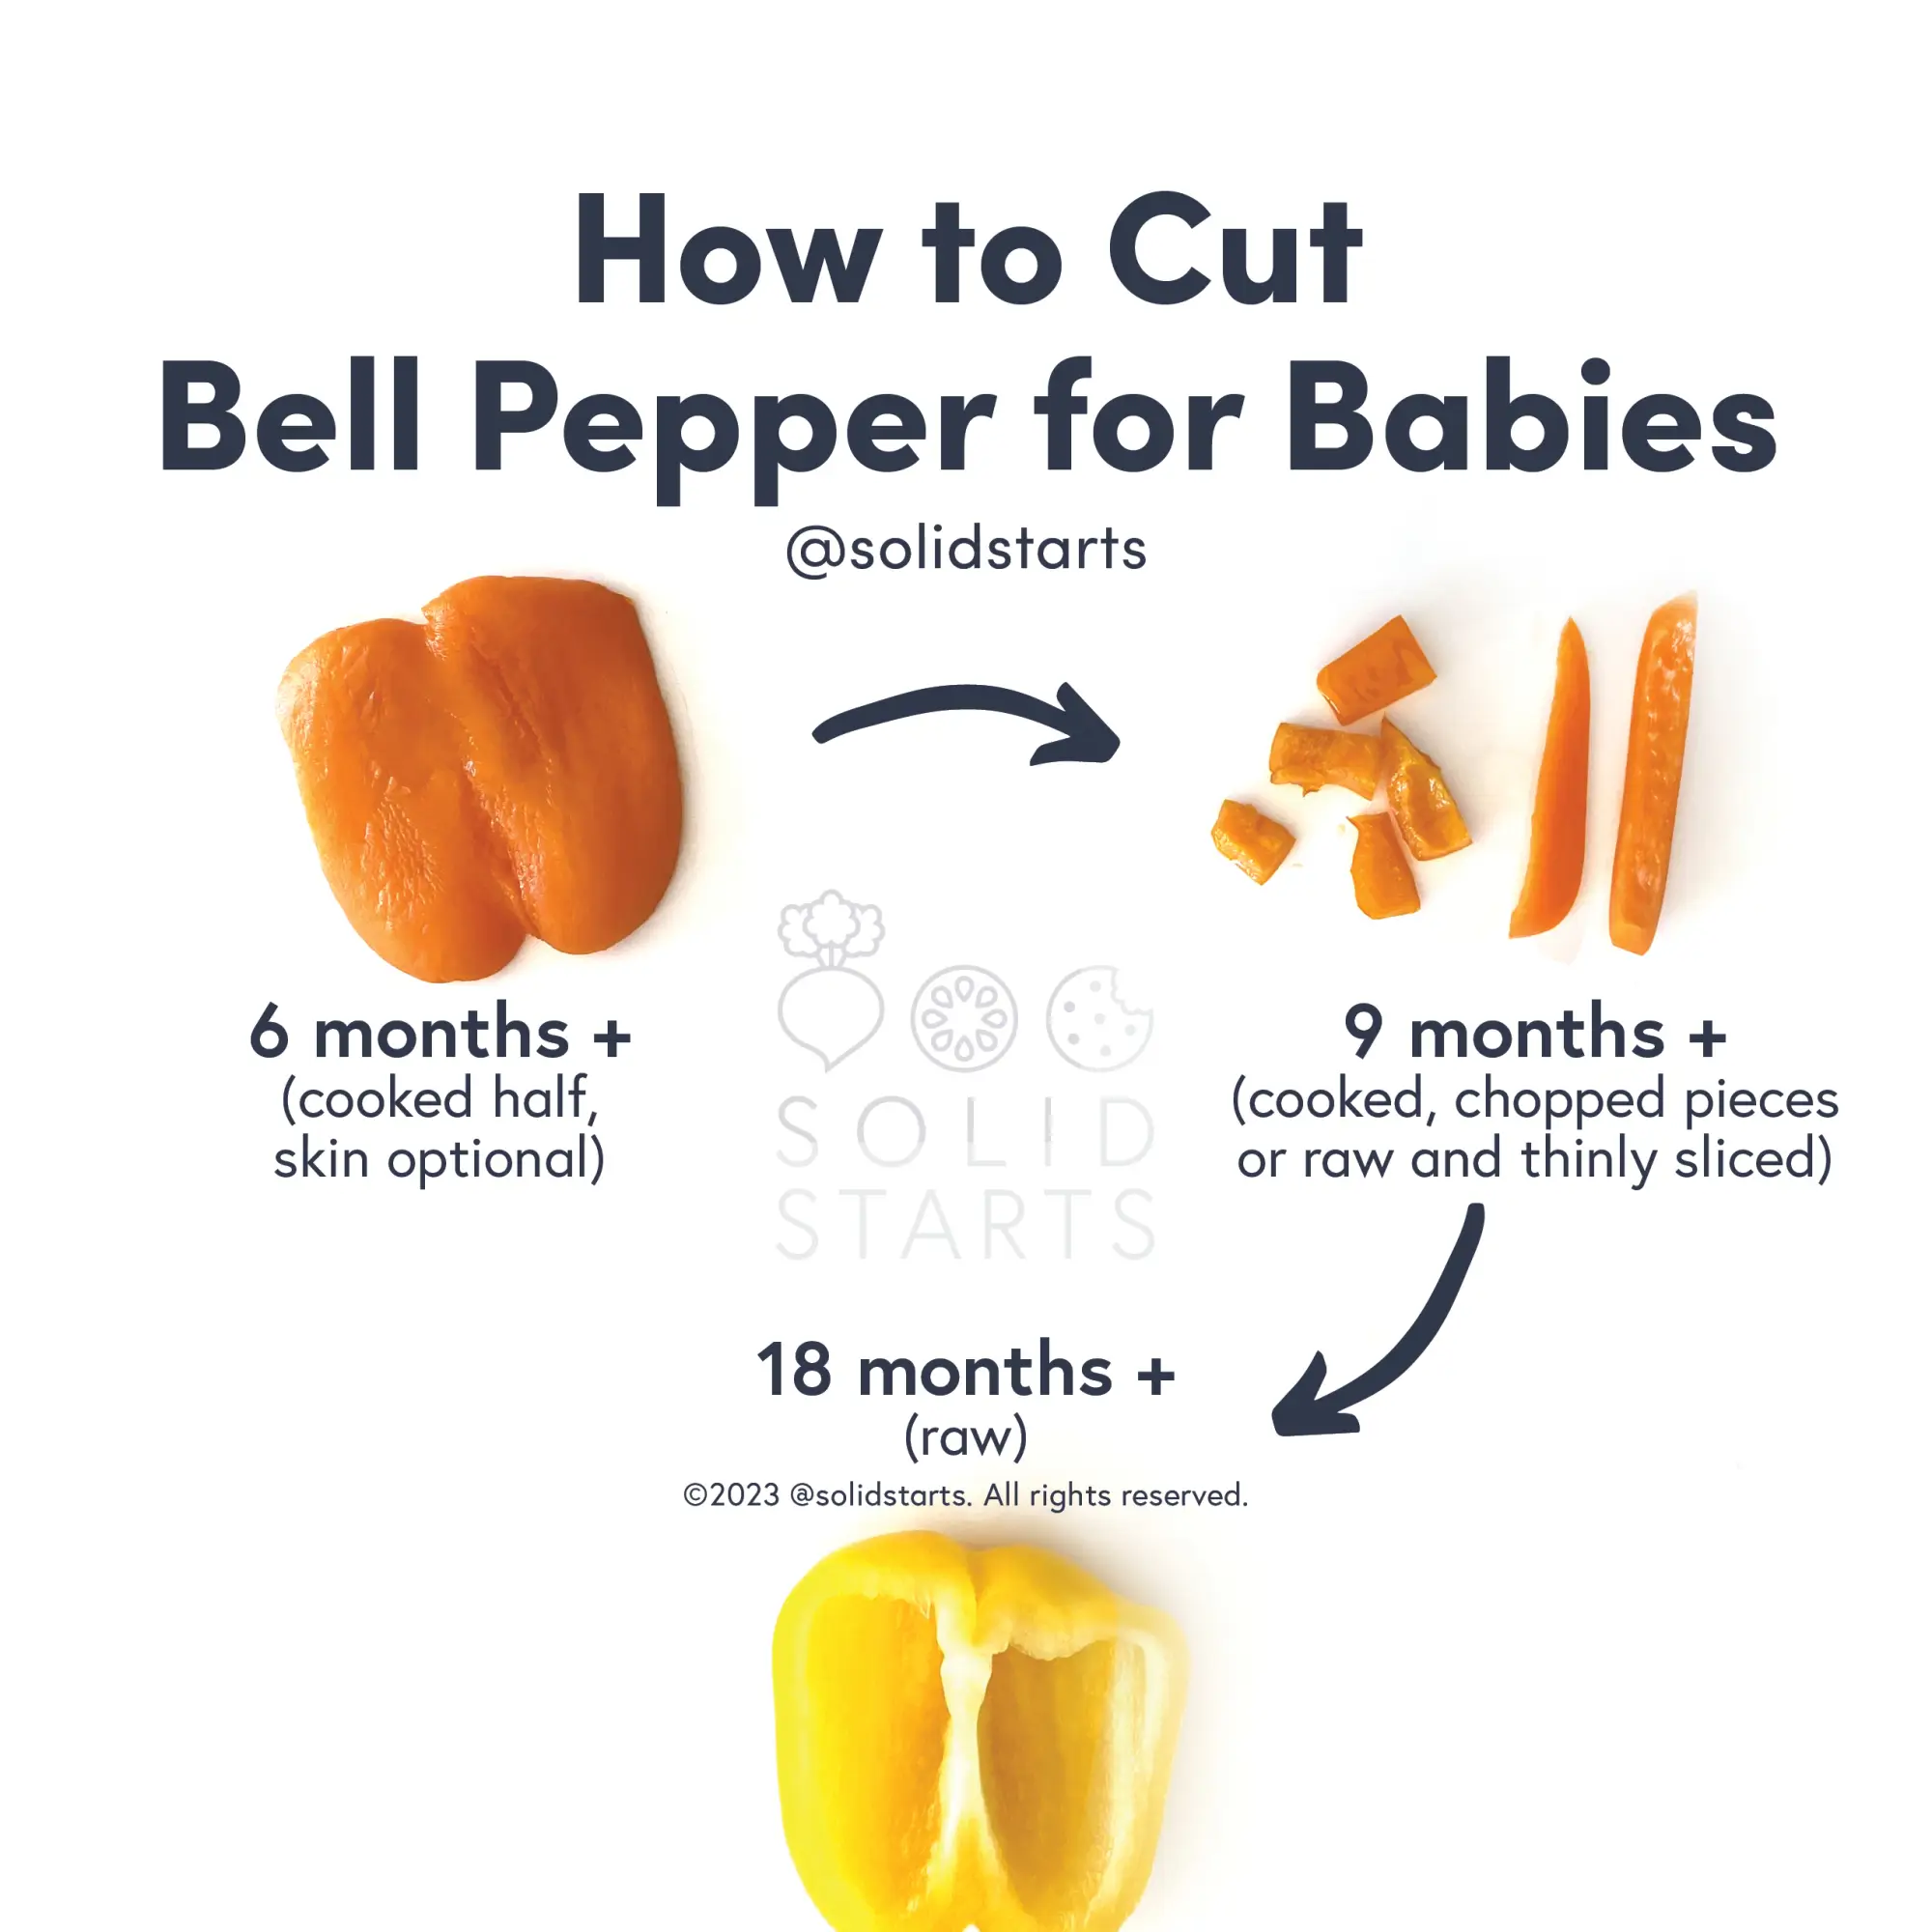 an infographic with the header "how to cut bell pepper for babies": a half of a cooked bell pepper, skin removed, for 6 months+, cooked chopped pieces or raw thin slices for babies 9 months+, half a raw bell pepper for 18 months+